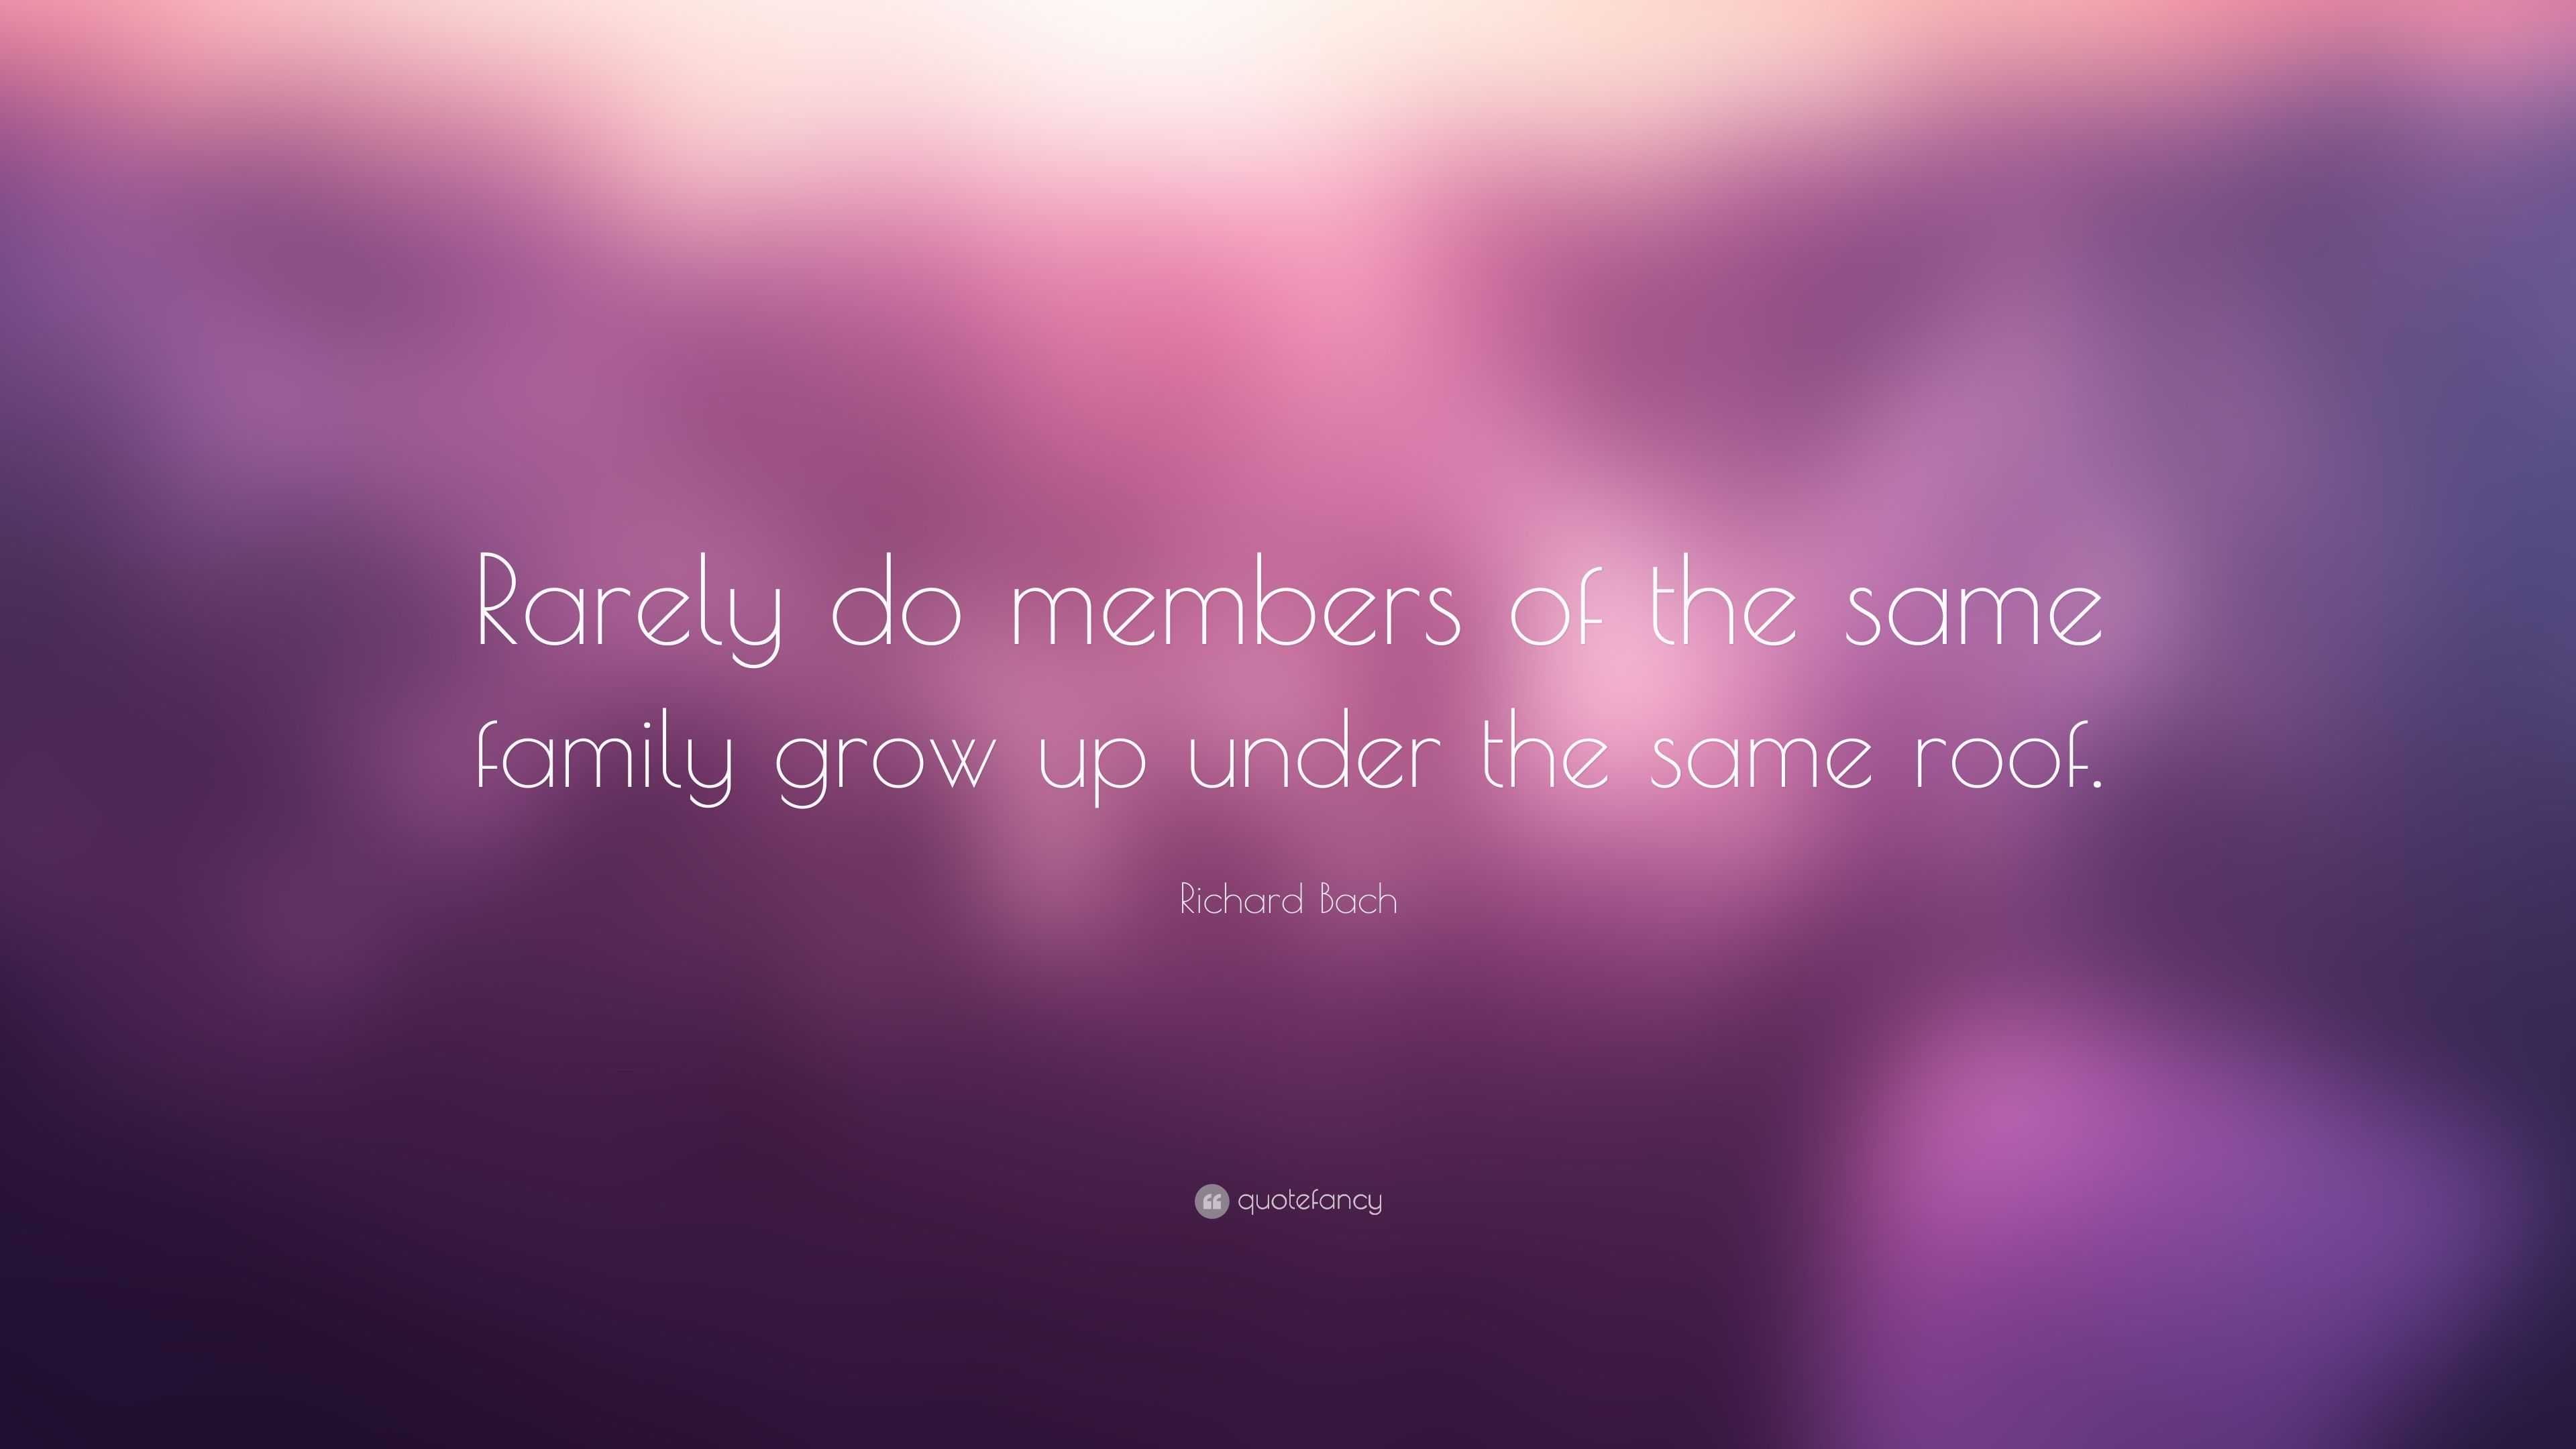 Richard Bach Quote: “Rarely do members of the same family grow up under ...